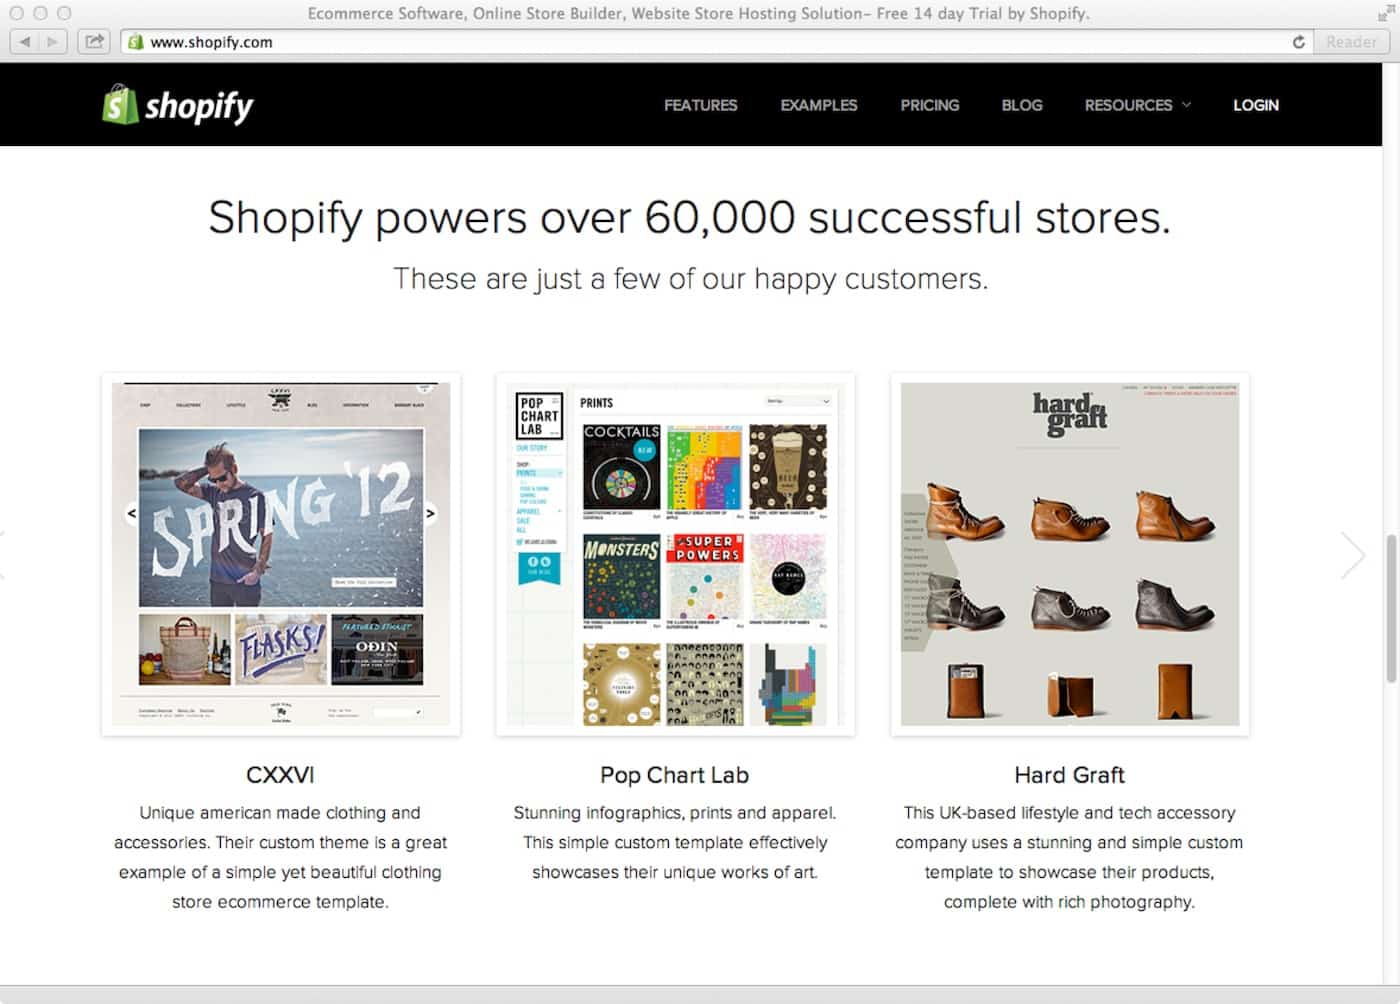 Shopify - Hosted ecommerce